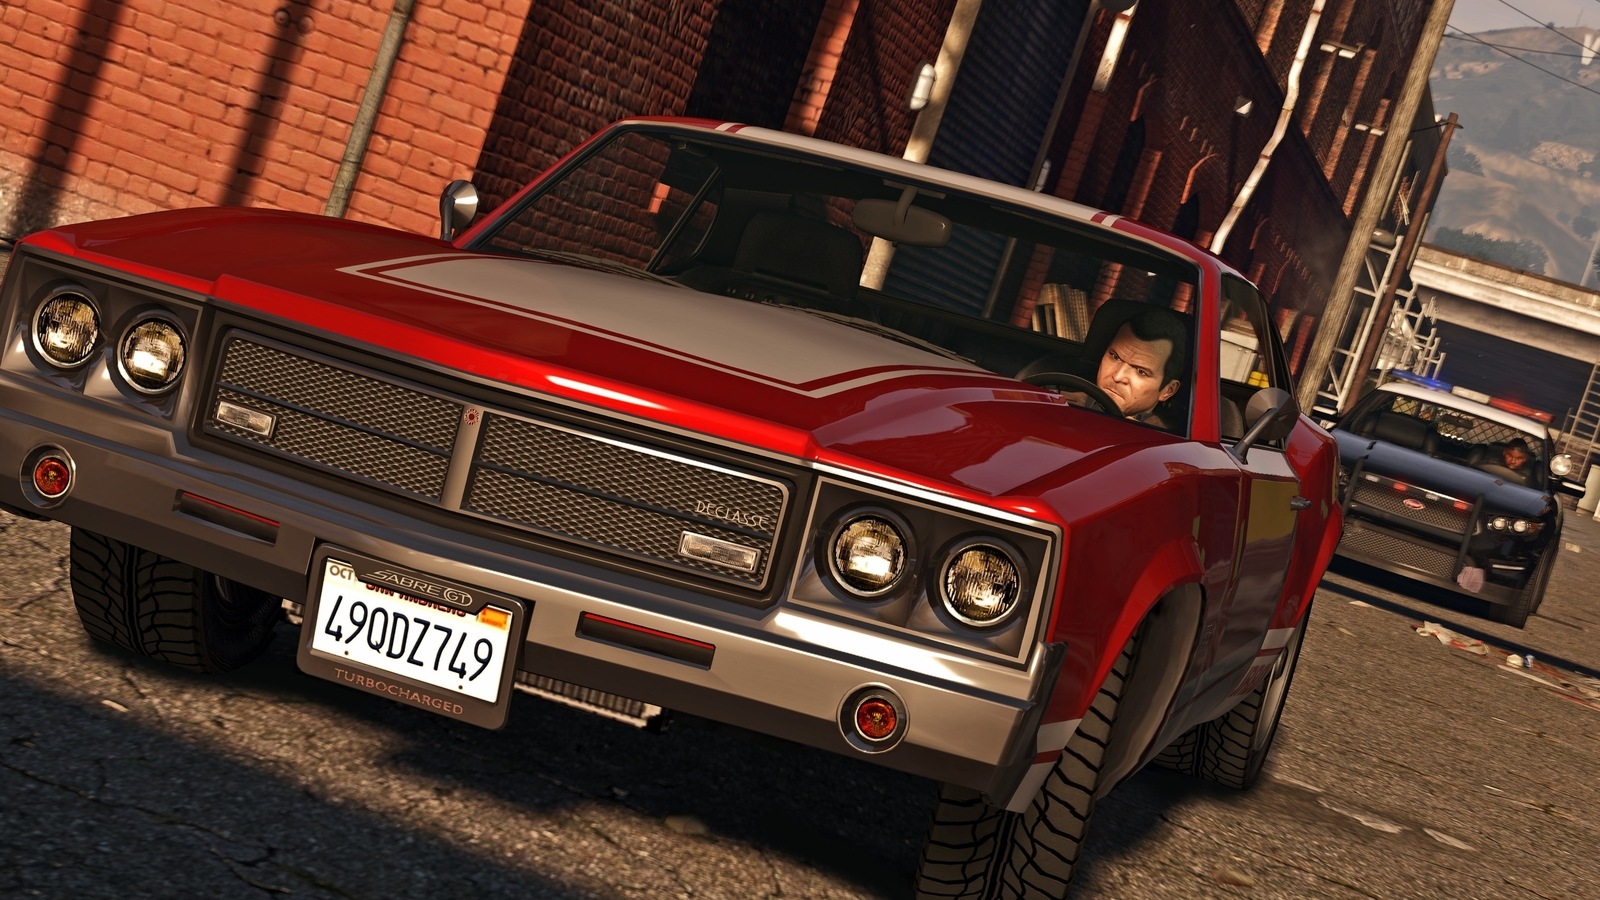 Grand Theft Auto 5 Android Port Now Available, Download Links Here